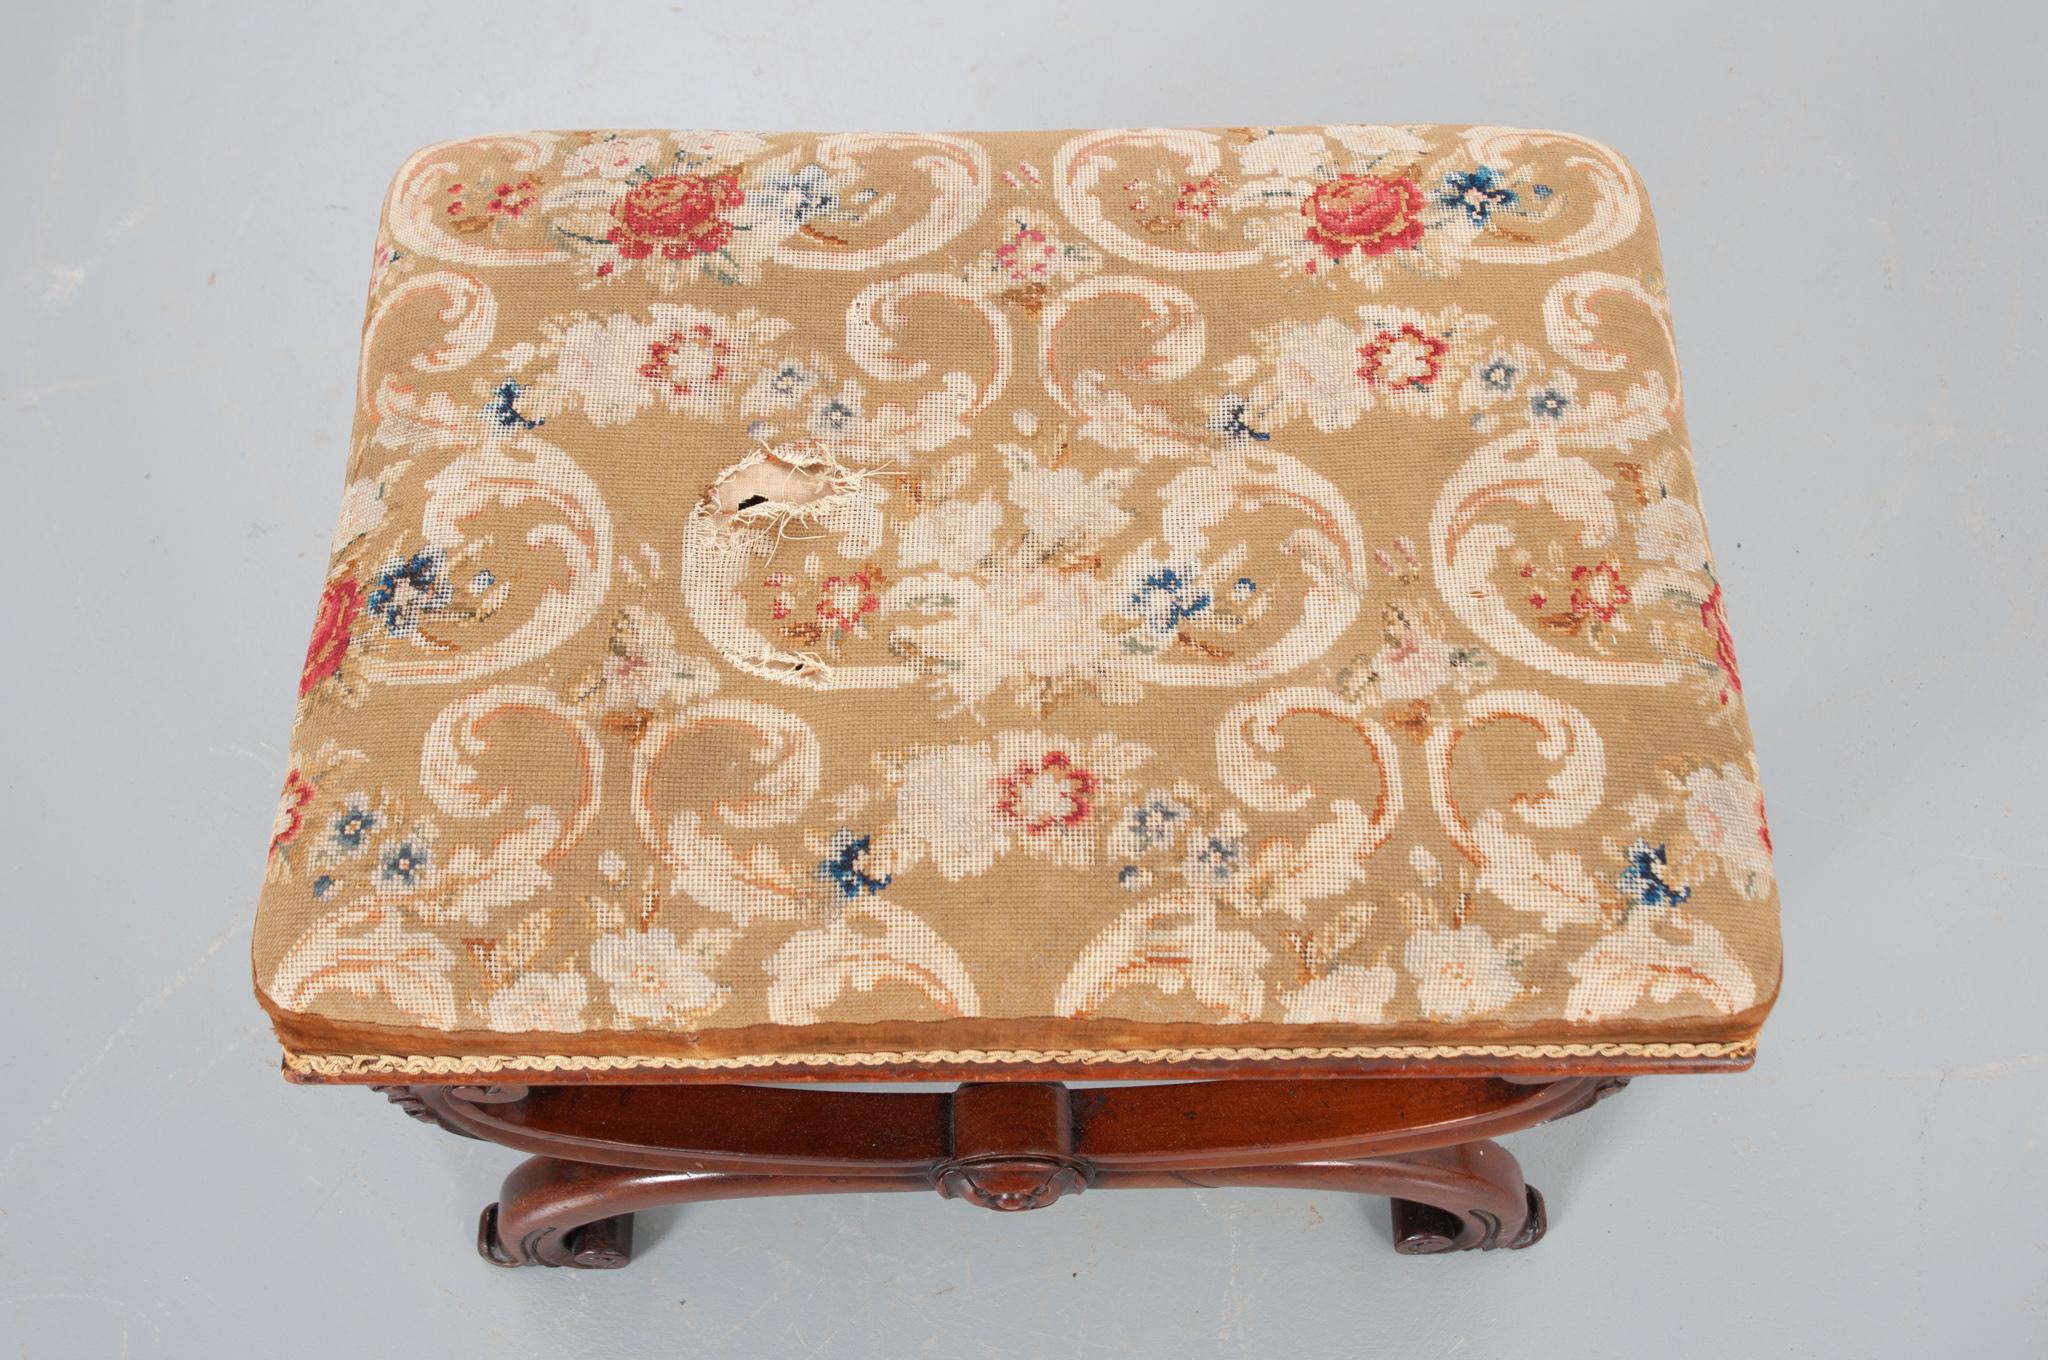 A sensational 19th century French carved walnut stool with a gorgeous needlepoint tapestry seat. Incorporating elements of Louis XVI, the shaped X-frame base is attractive and is reinforced with an expertly turned walnut stretcher. The antique